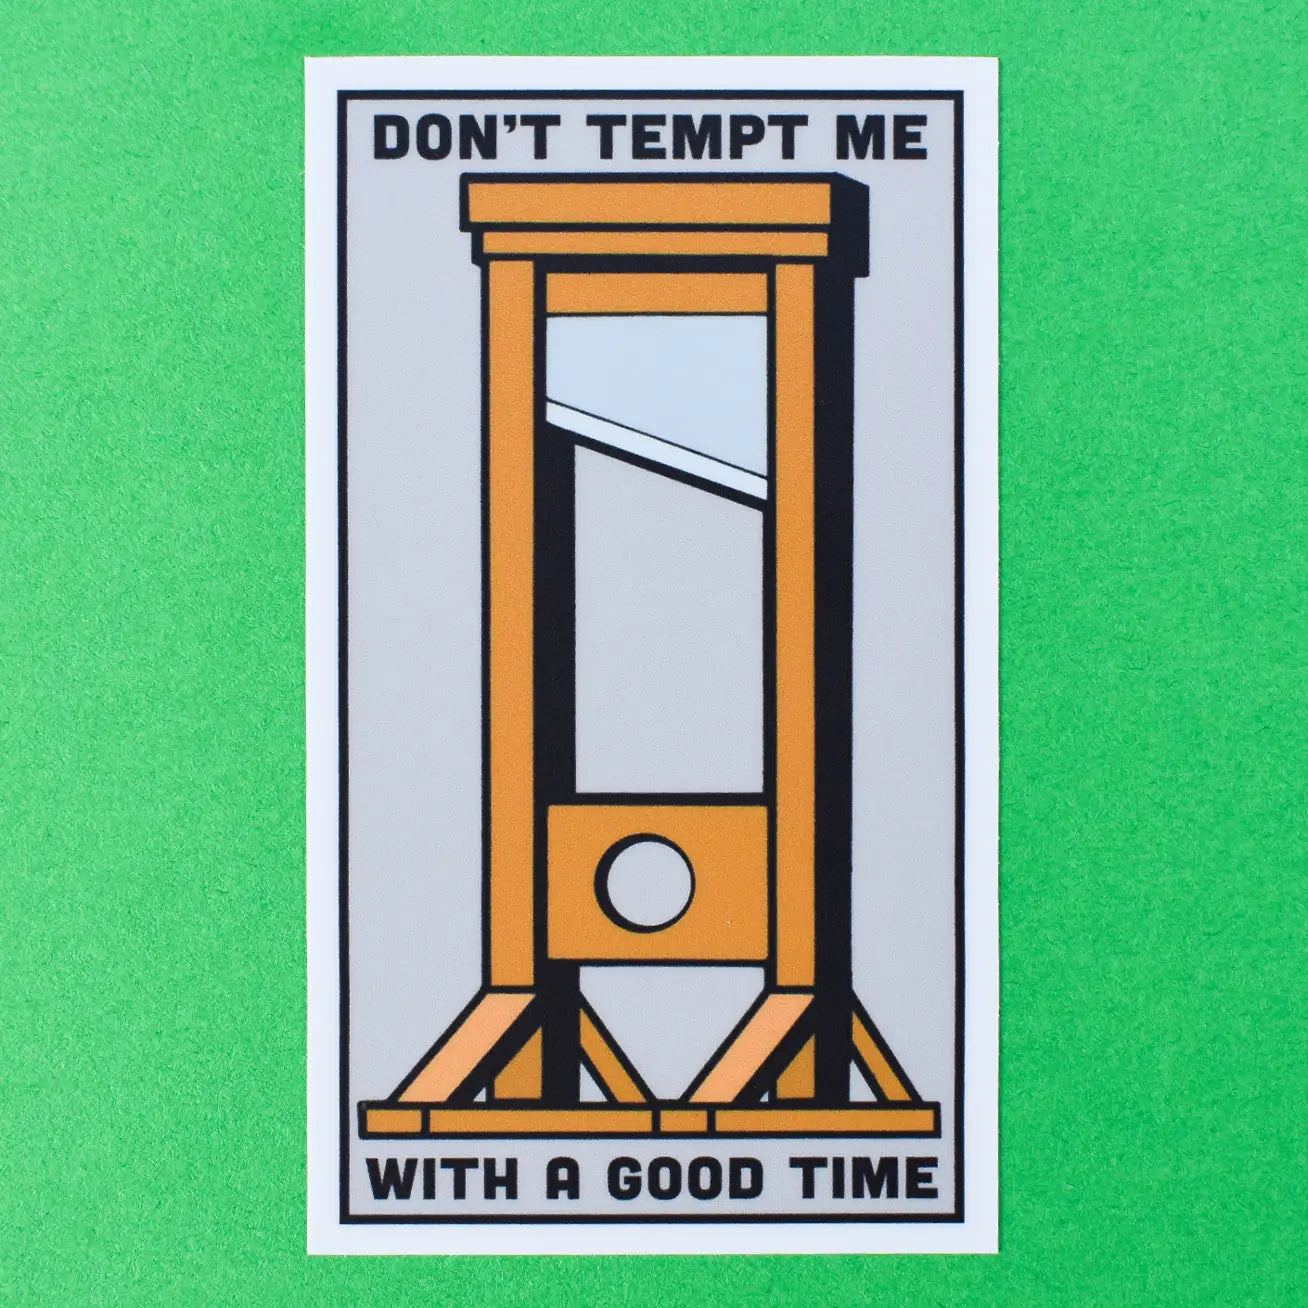 Rectangular vinyl sticker with an image of a brown wooden guillotine with the message “DON’T TEMPT ME WITH A GOOD TIME” on a light grey background